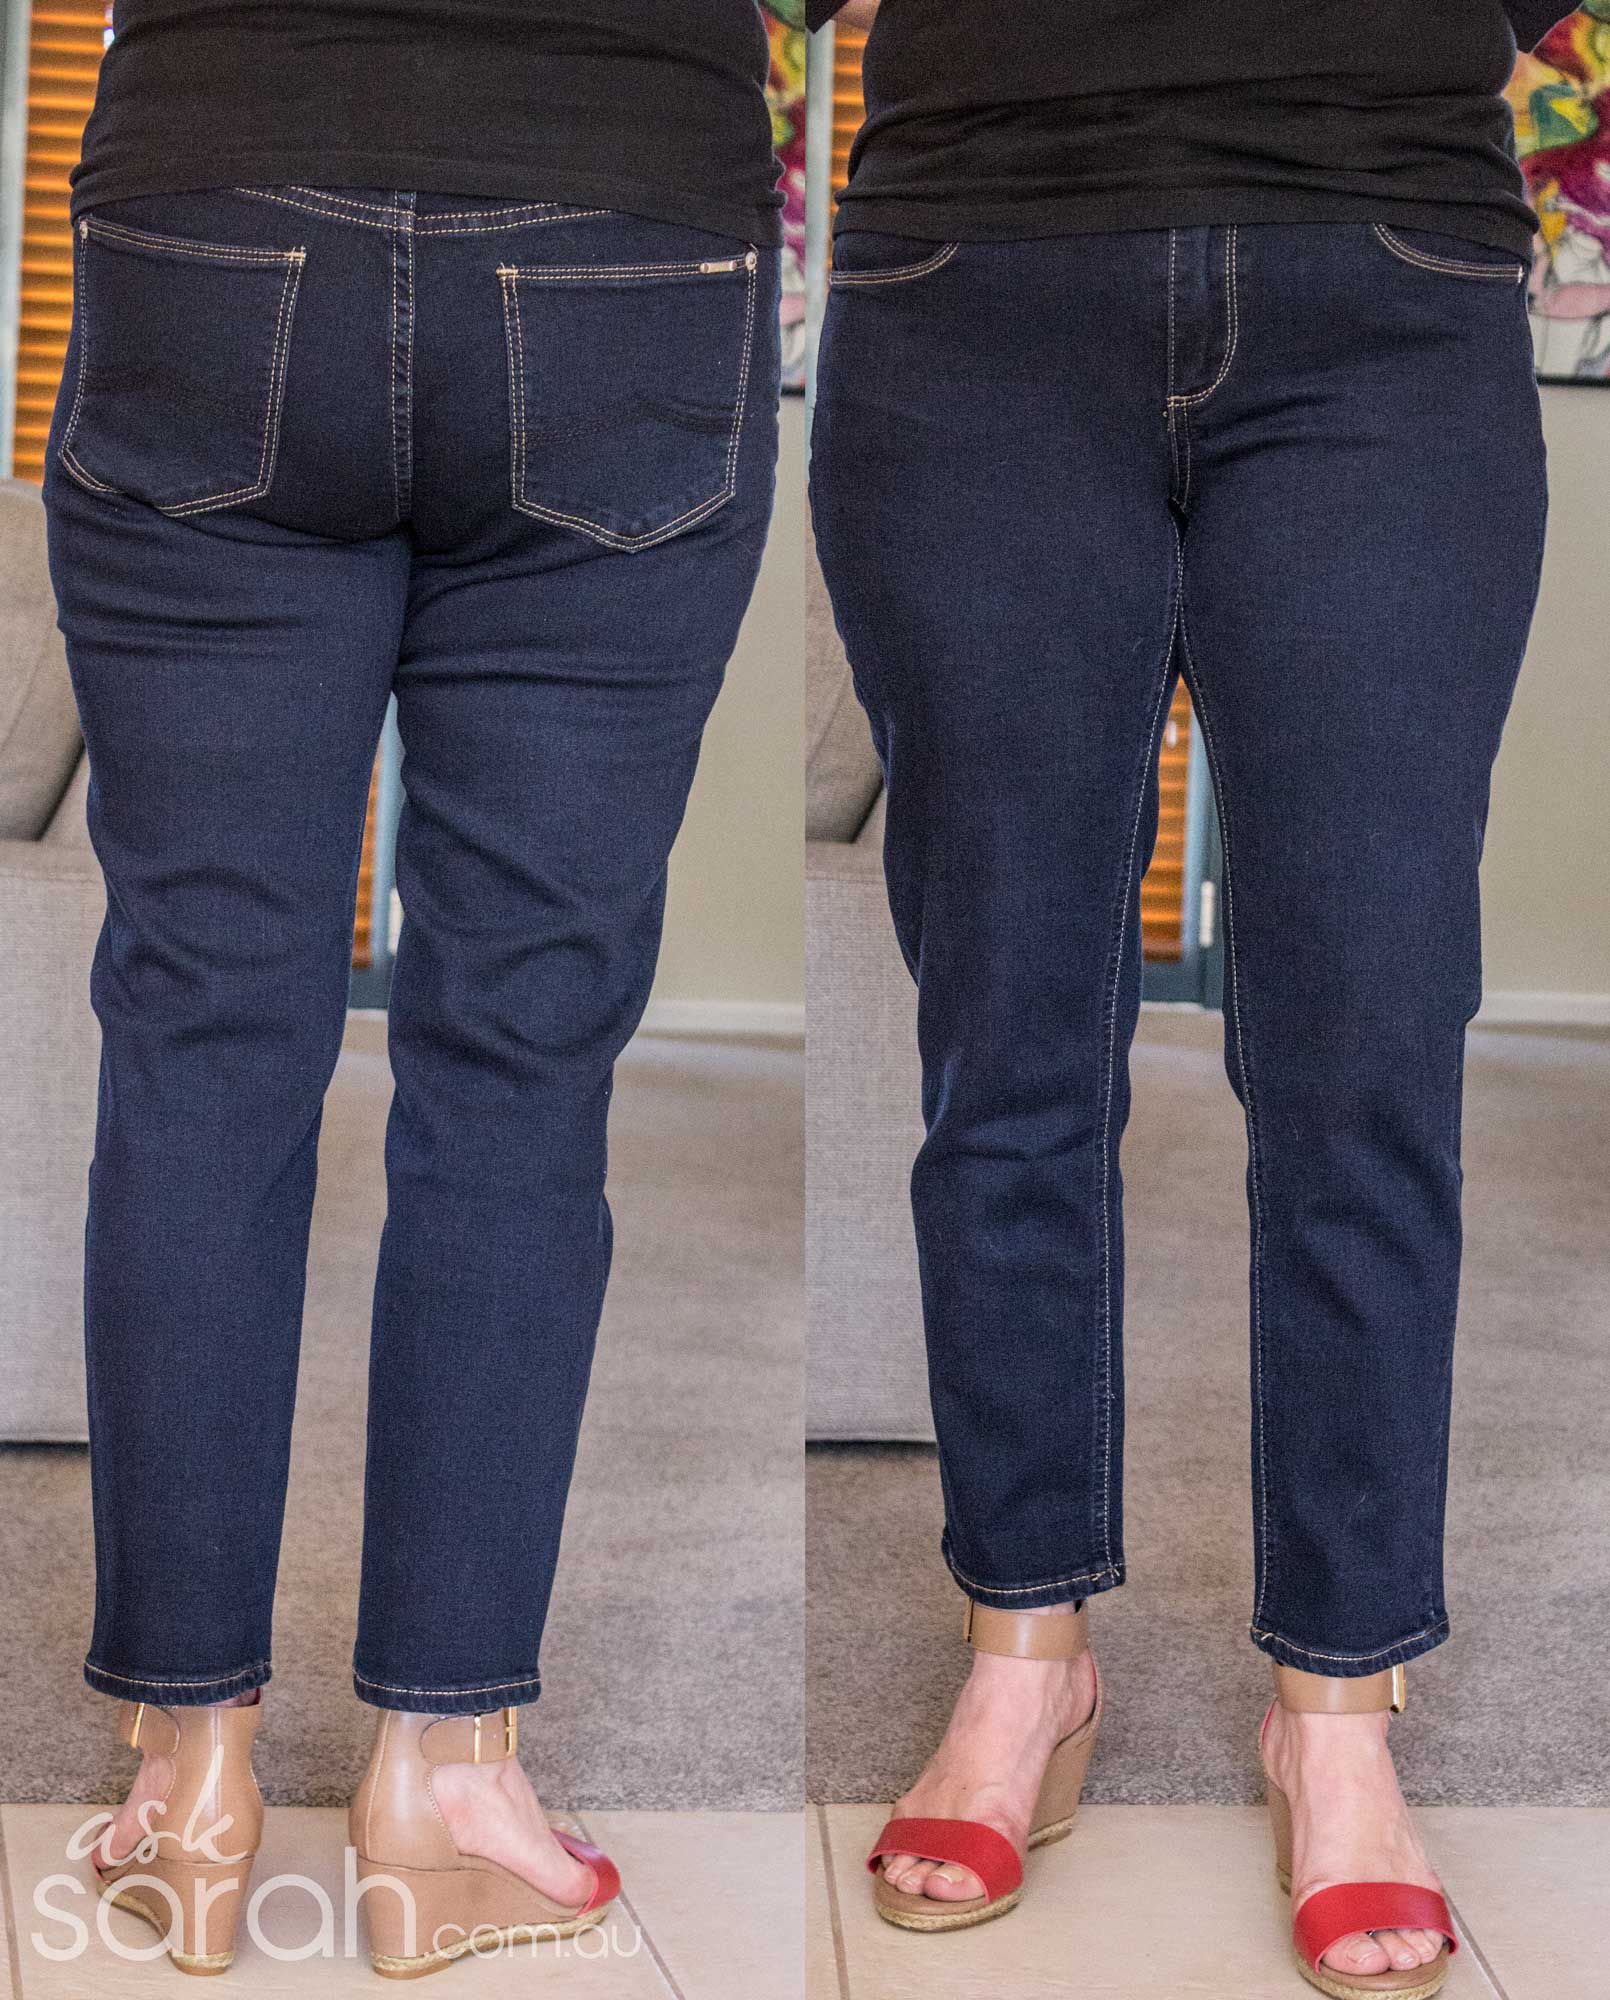 The Woman of Many Jeans & How To Make Buying Them Easier